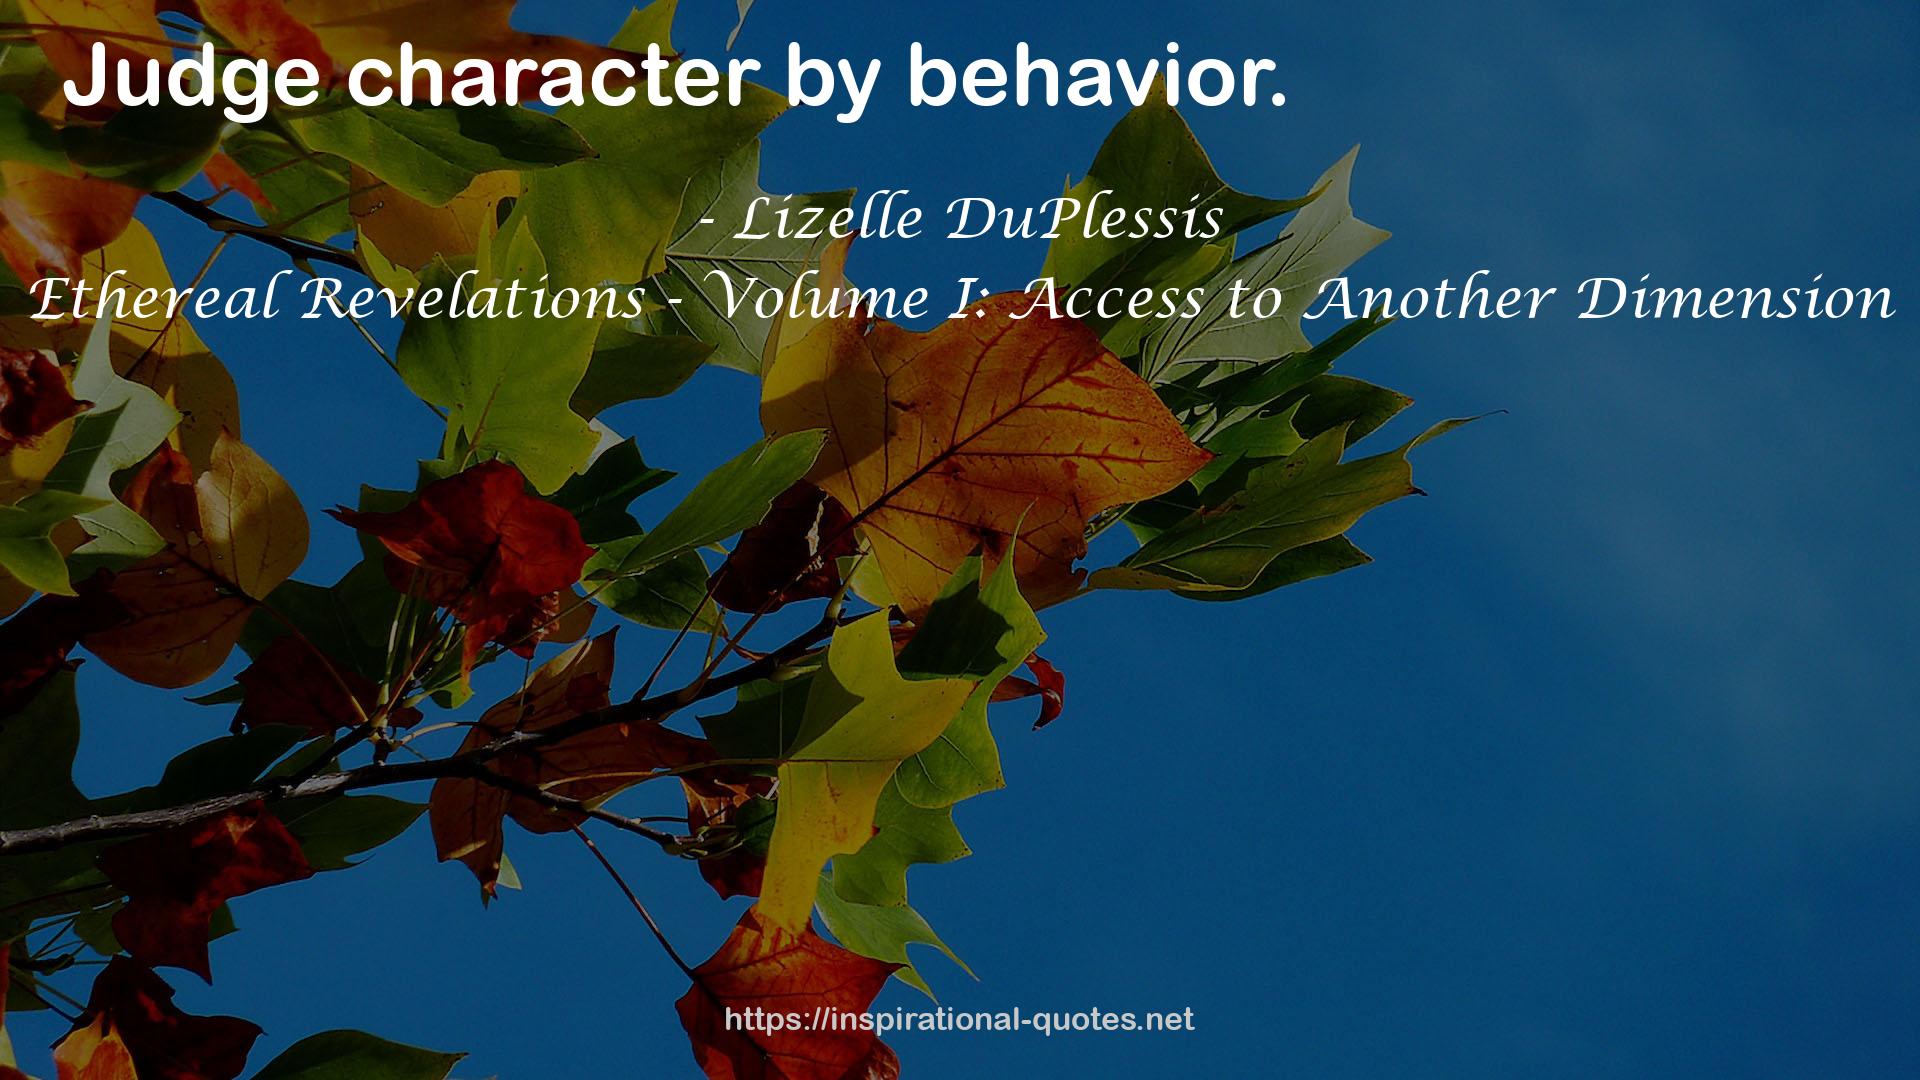 Lizelle DuPlessis QUOTES